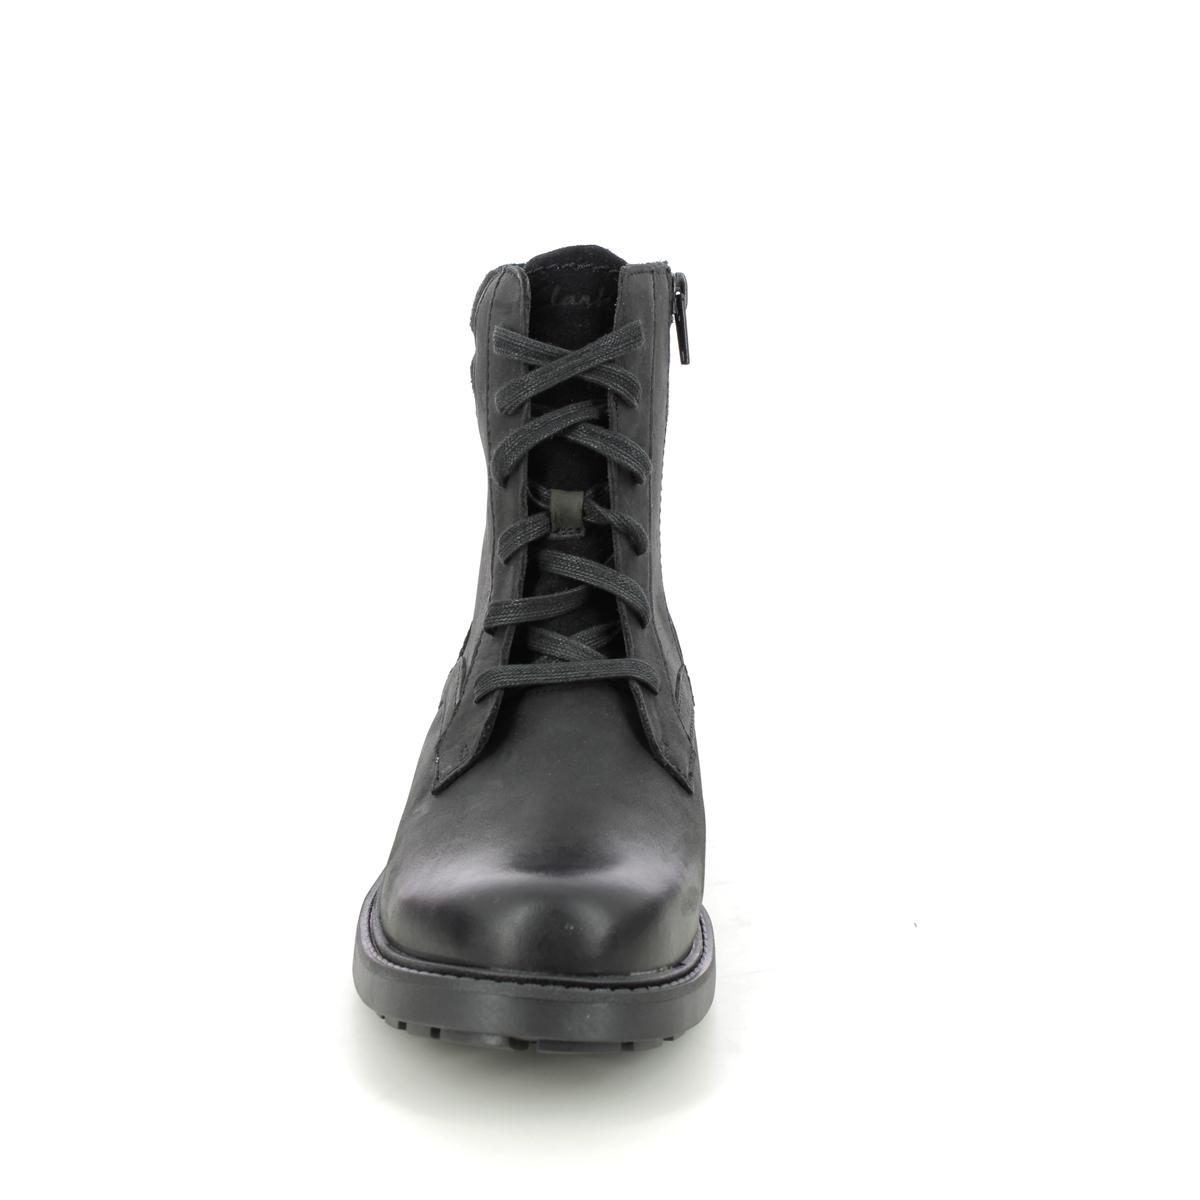 Clarks Orinoco 2 Spice D Fit Black Lace Up Boots